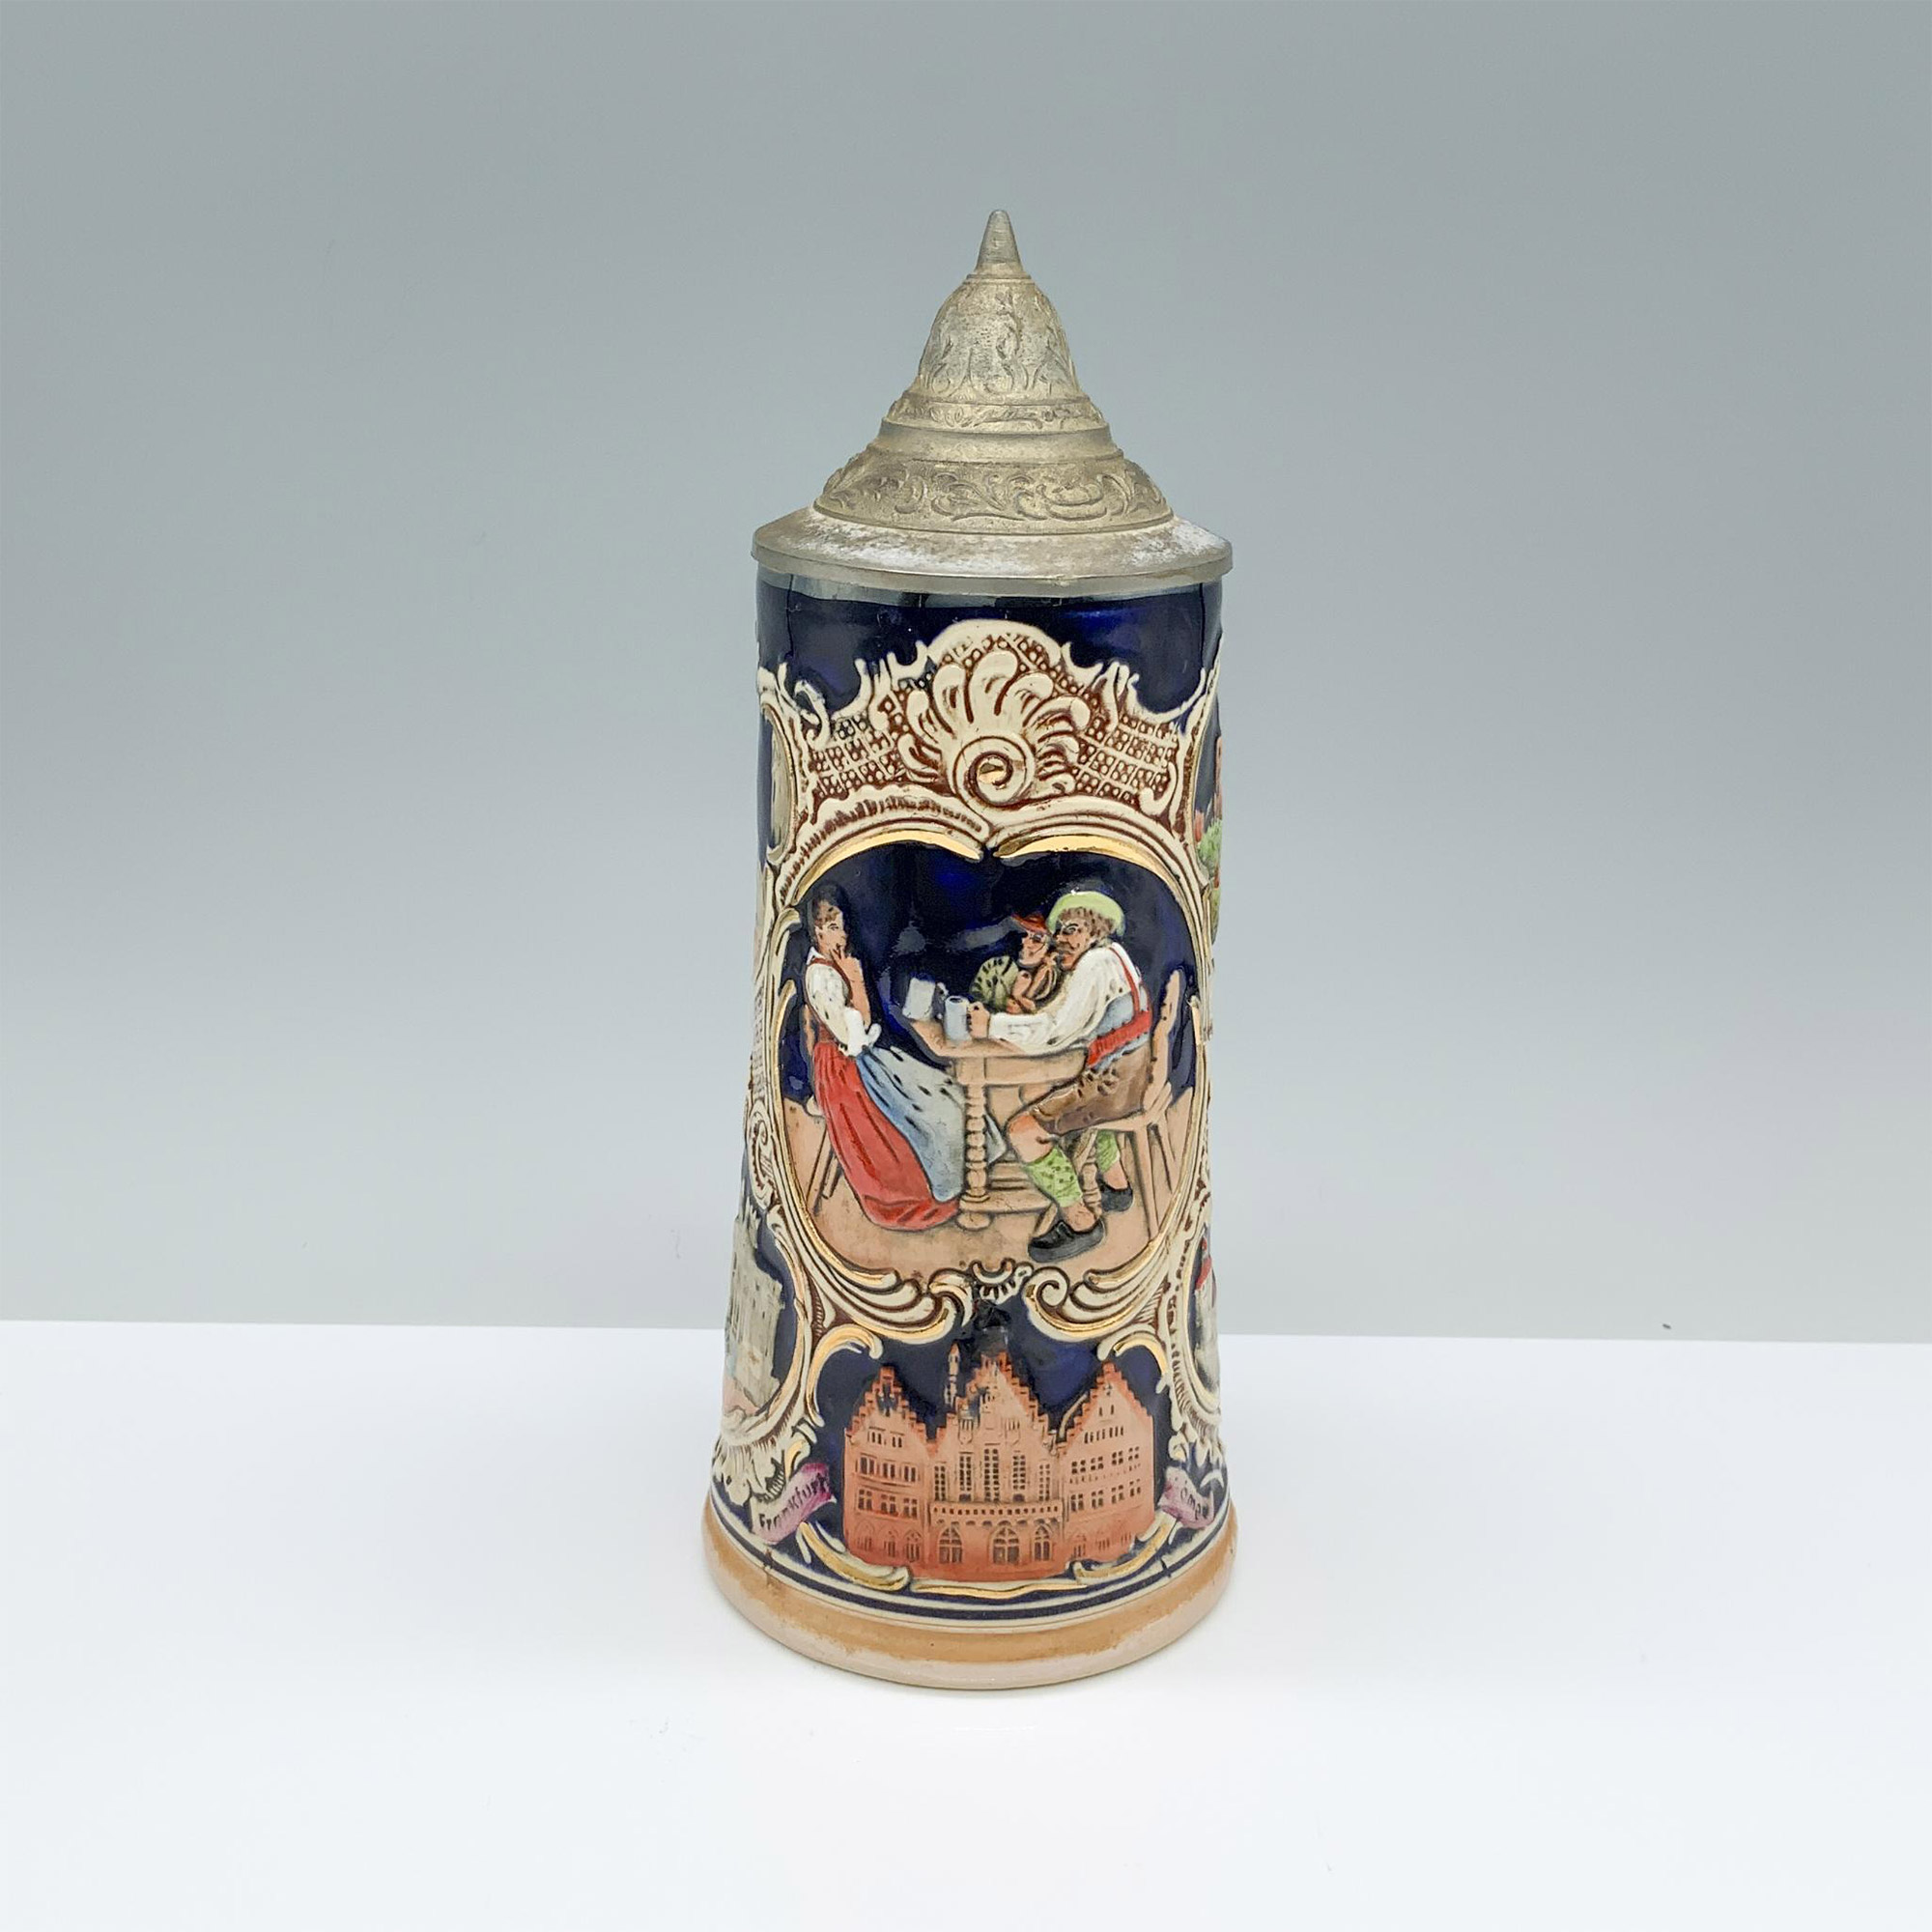 Marzi & Remy Germany Beer Stein 2893 - Image 2 of 5